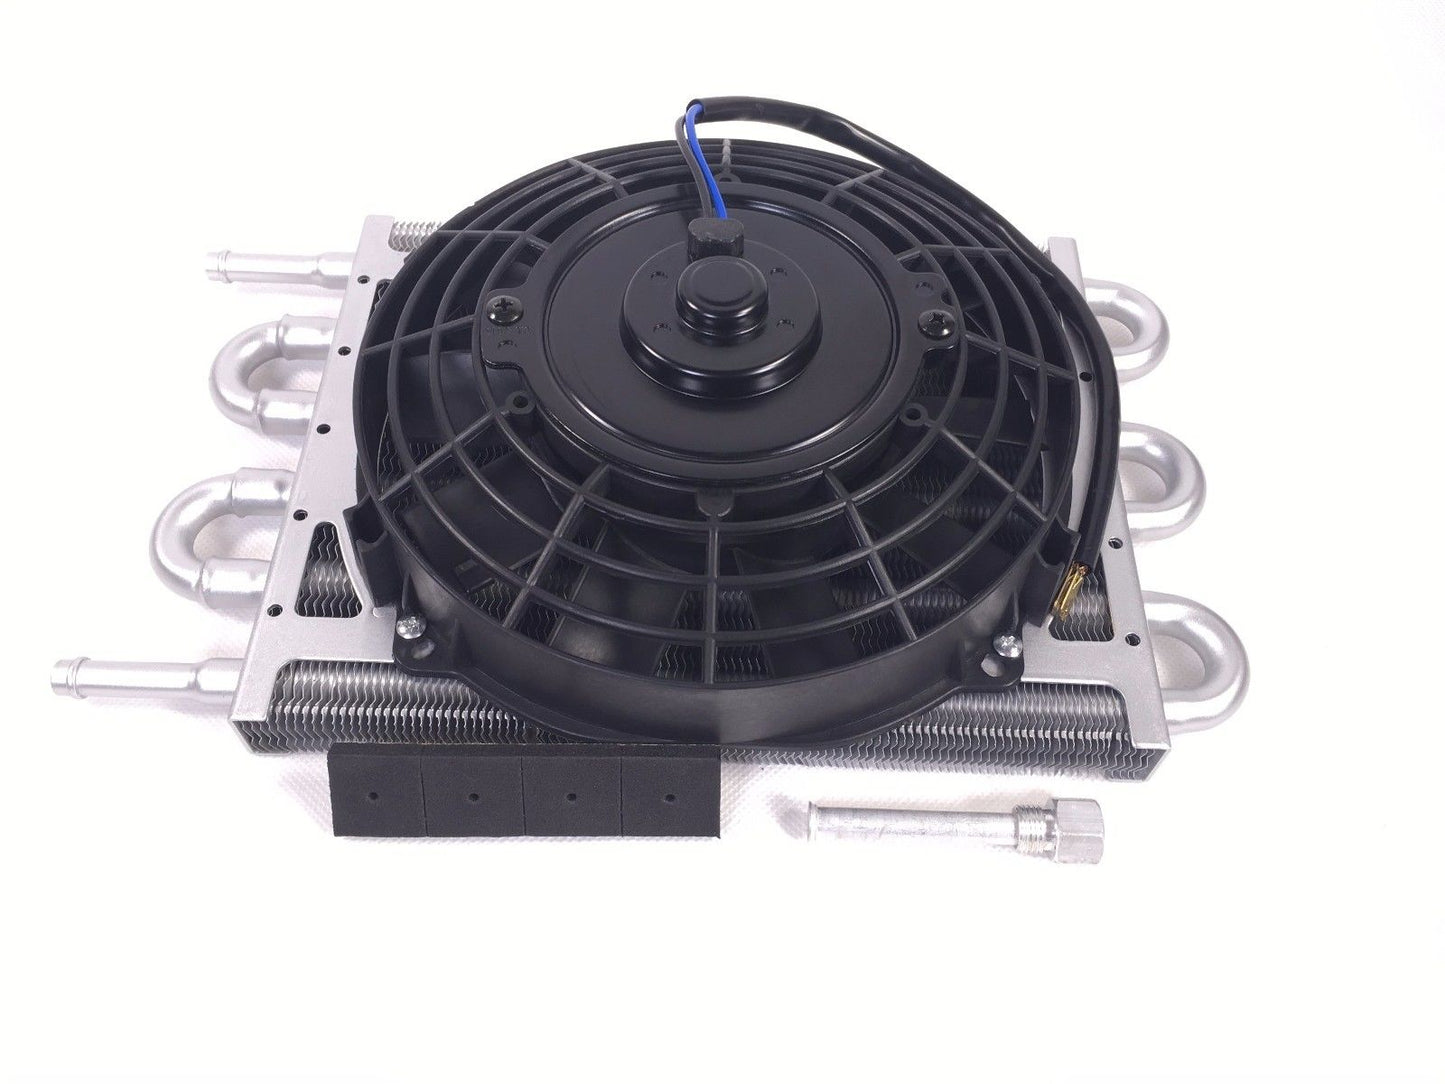 Heavy Duty Transmission Aluminum Oil Cooler with 7'' Electric Fan